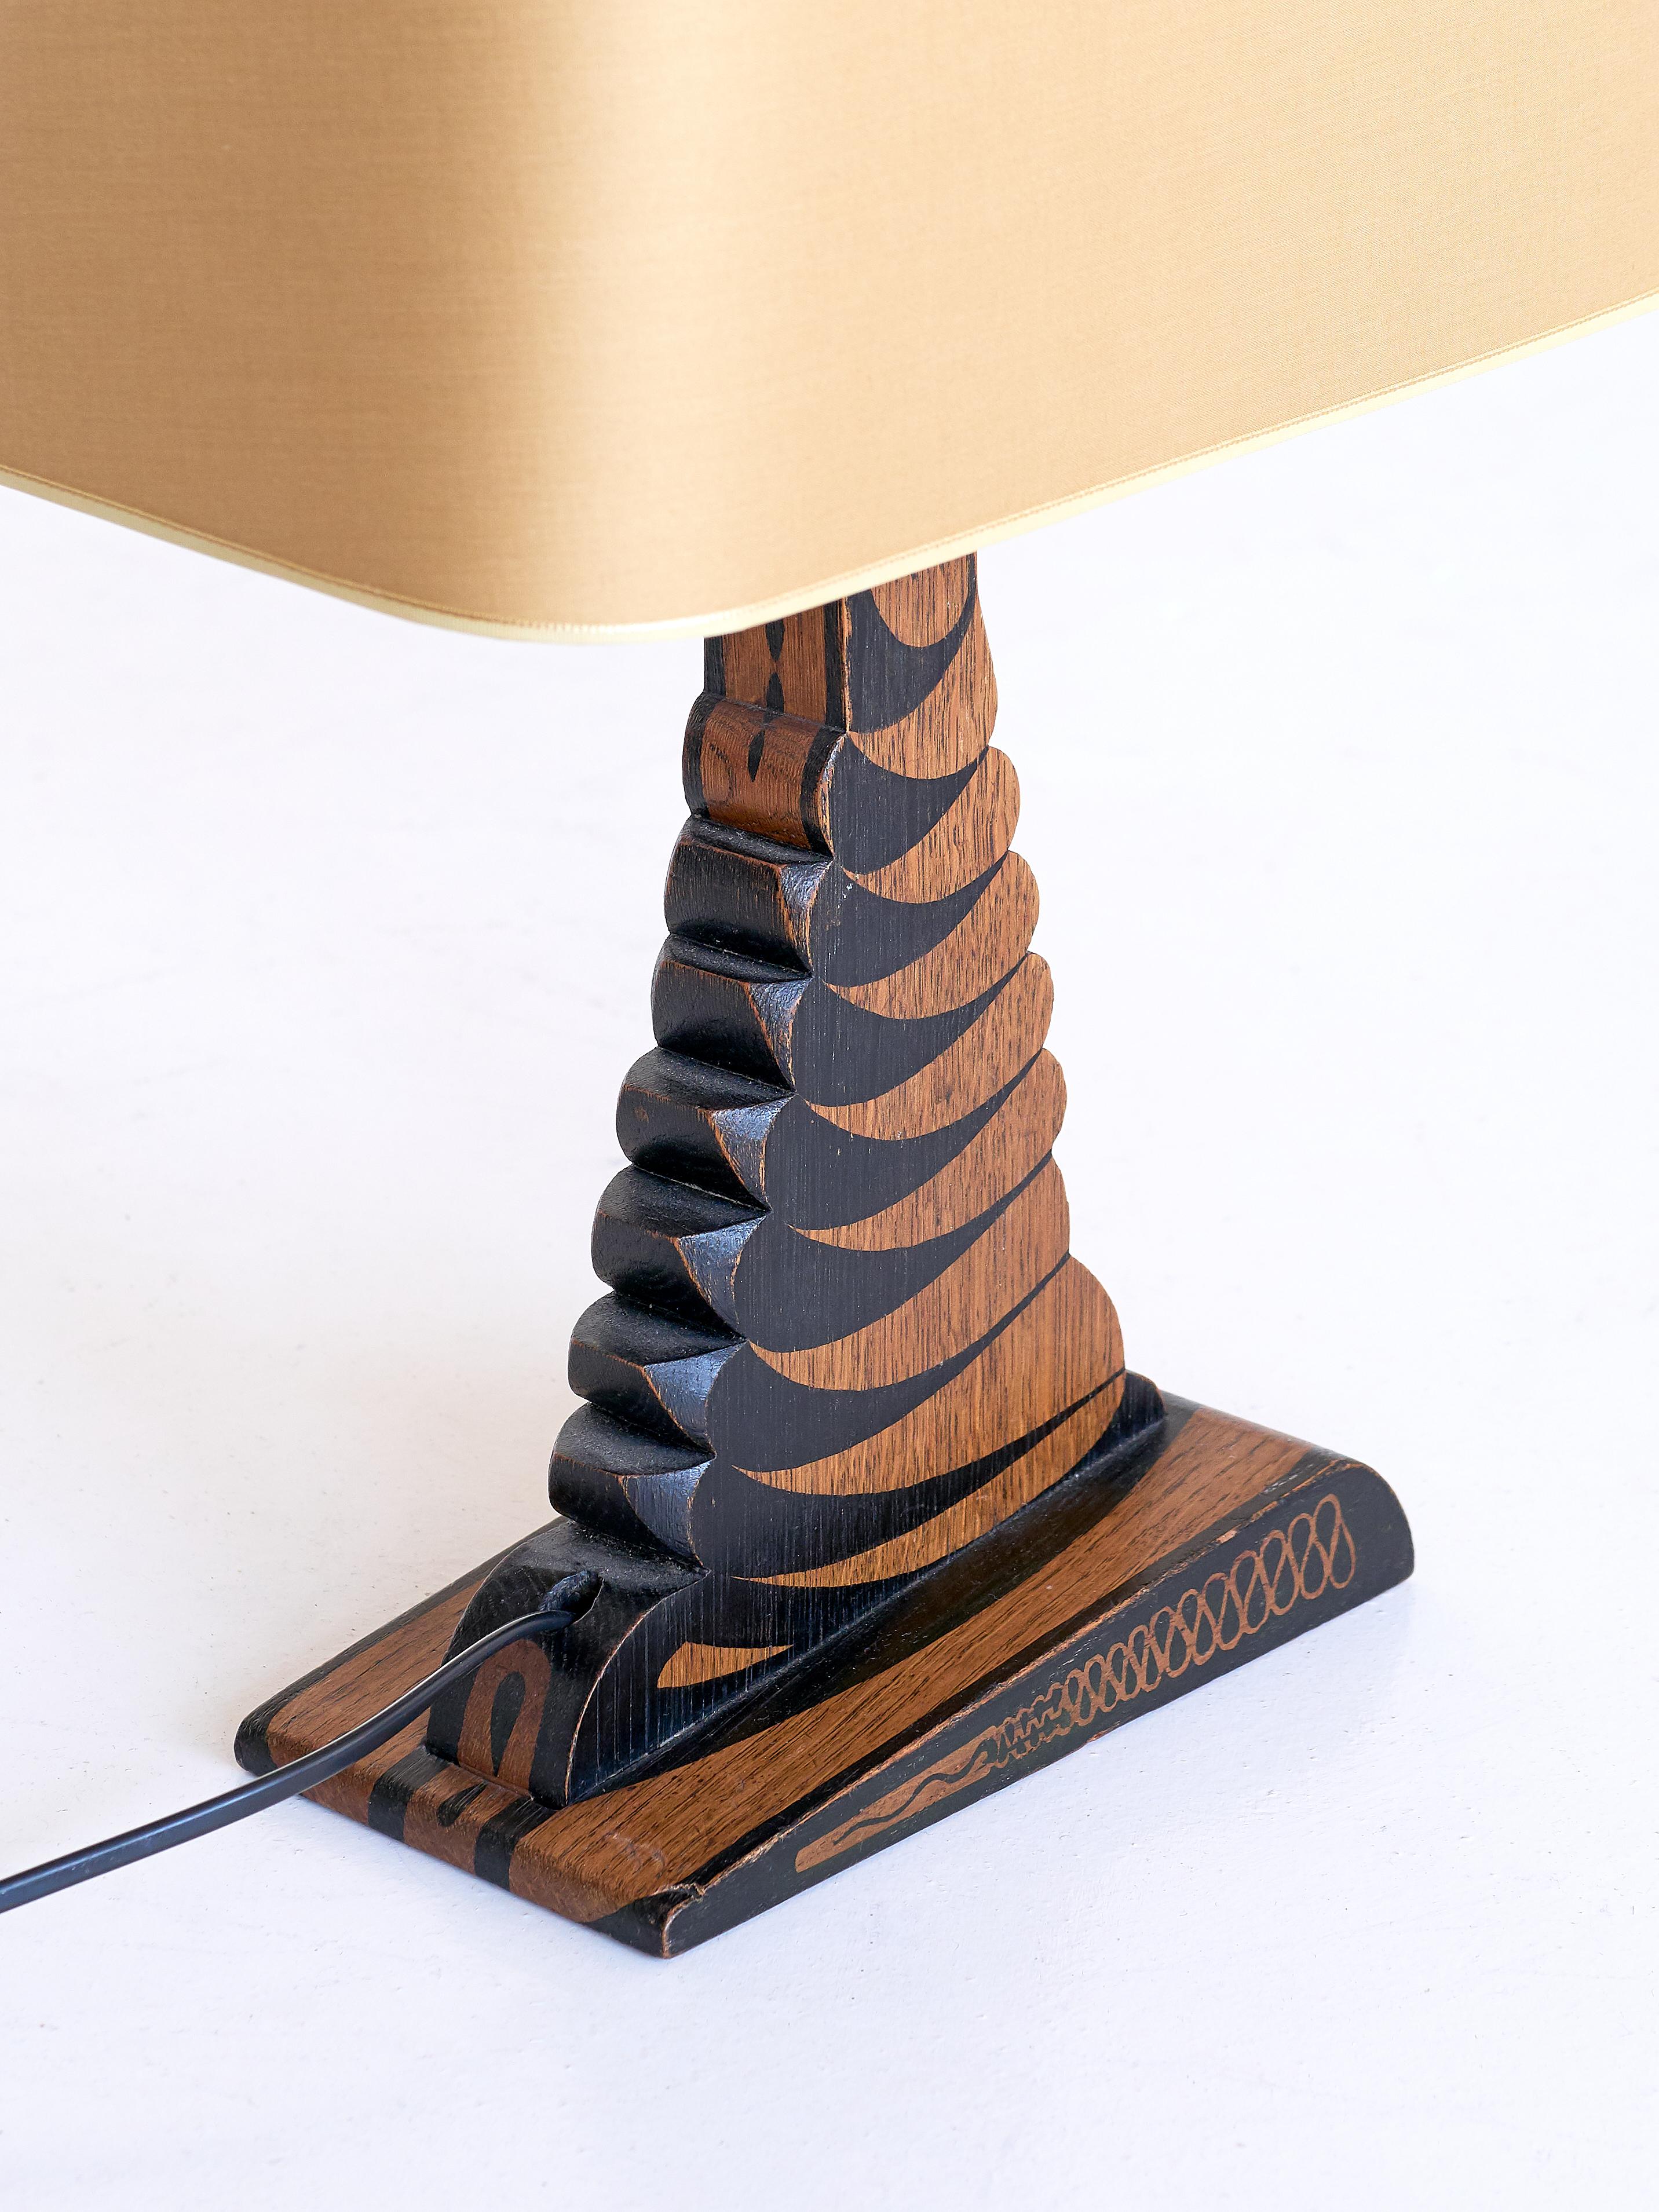 Early 20th Century Louis Bogtman Batiked Oak Table Lamp with Yellow Gold Shade, Netherlands, 1925